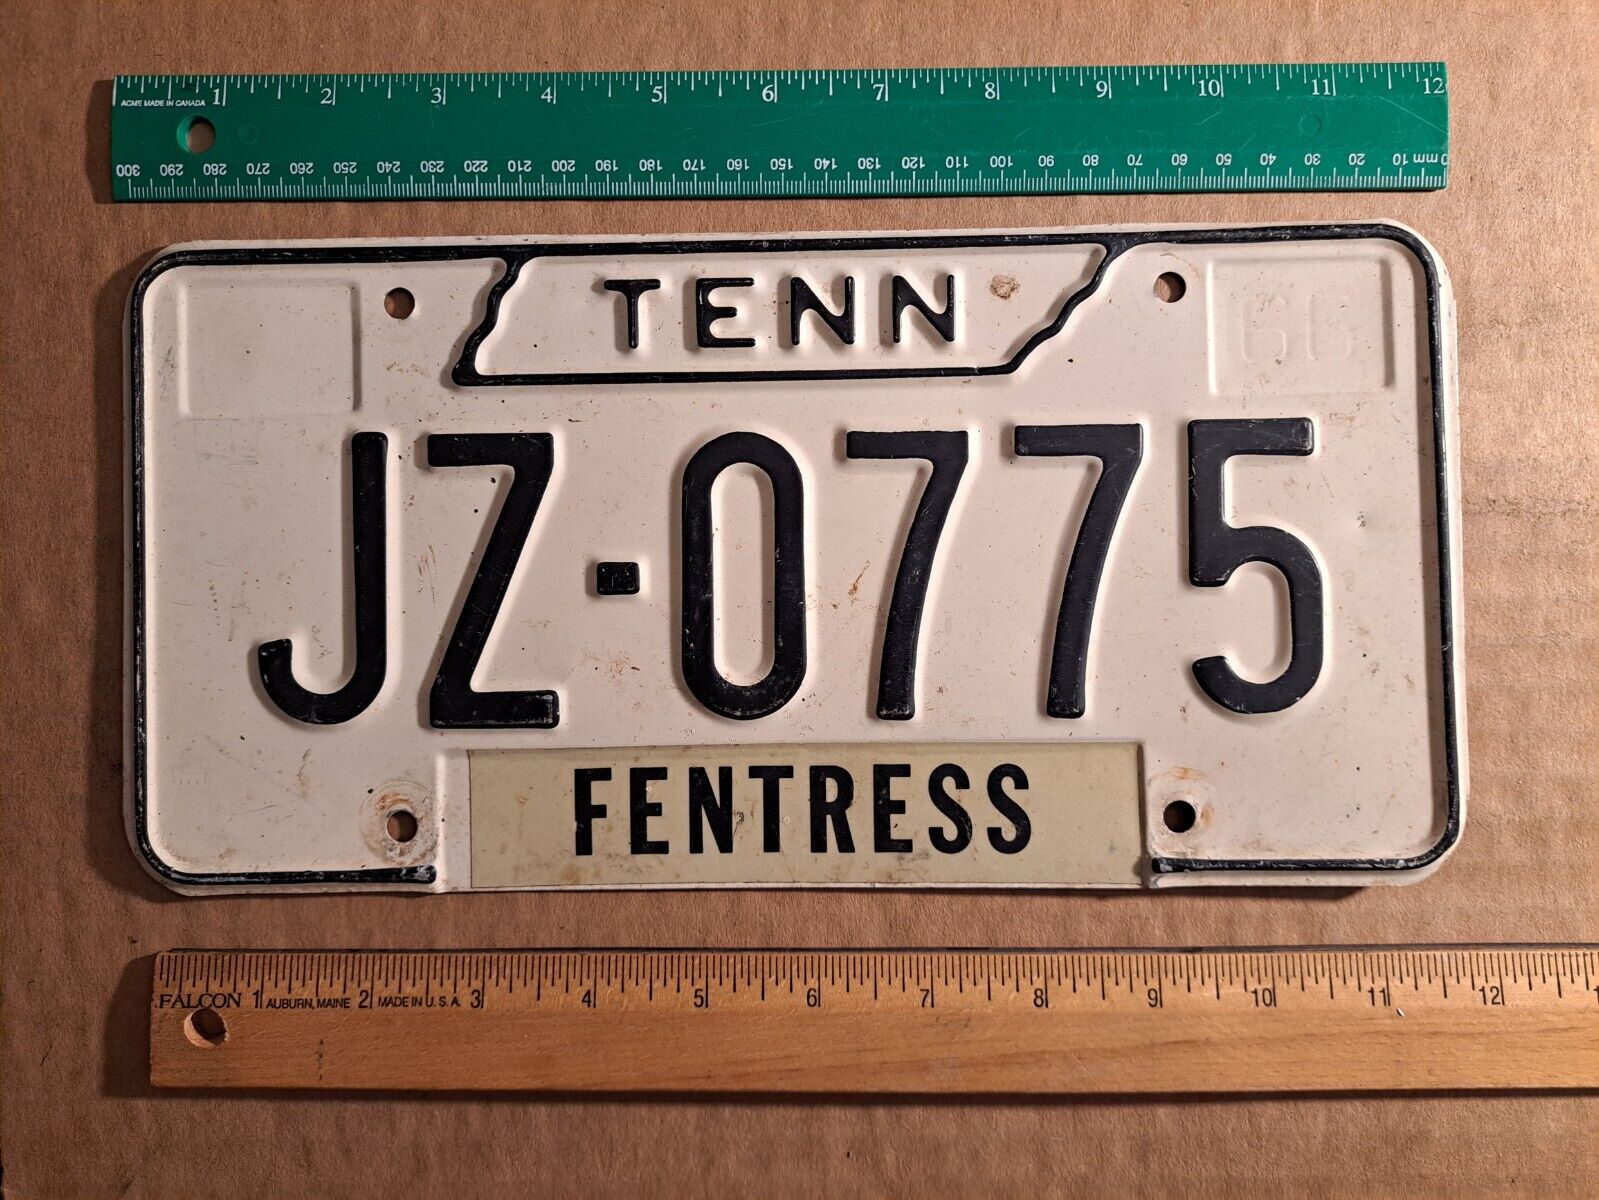 License Plate, Tennessee, 1966 (debossed 66 top right), Passenger, JZ 0775